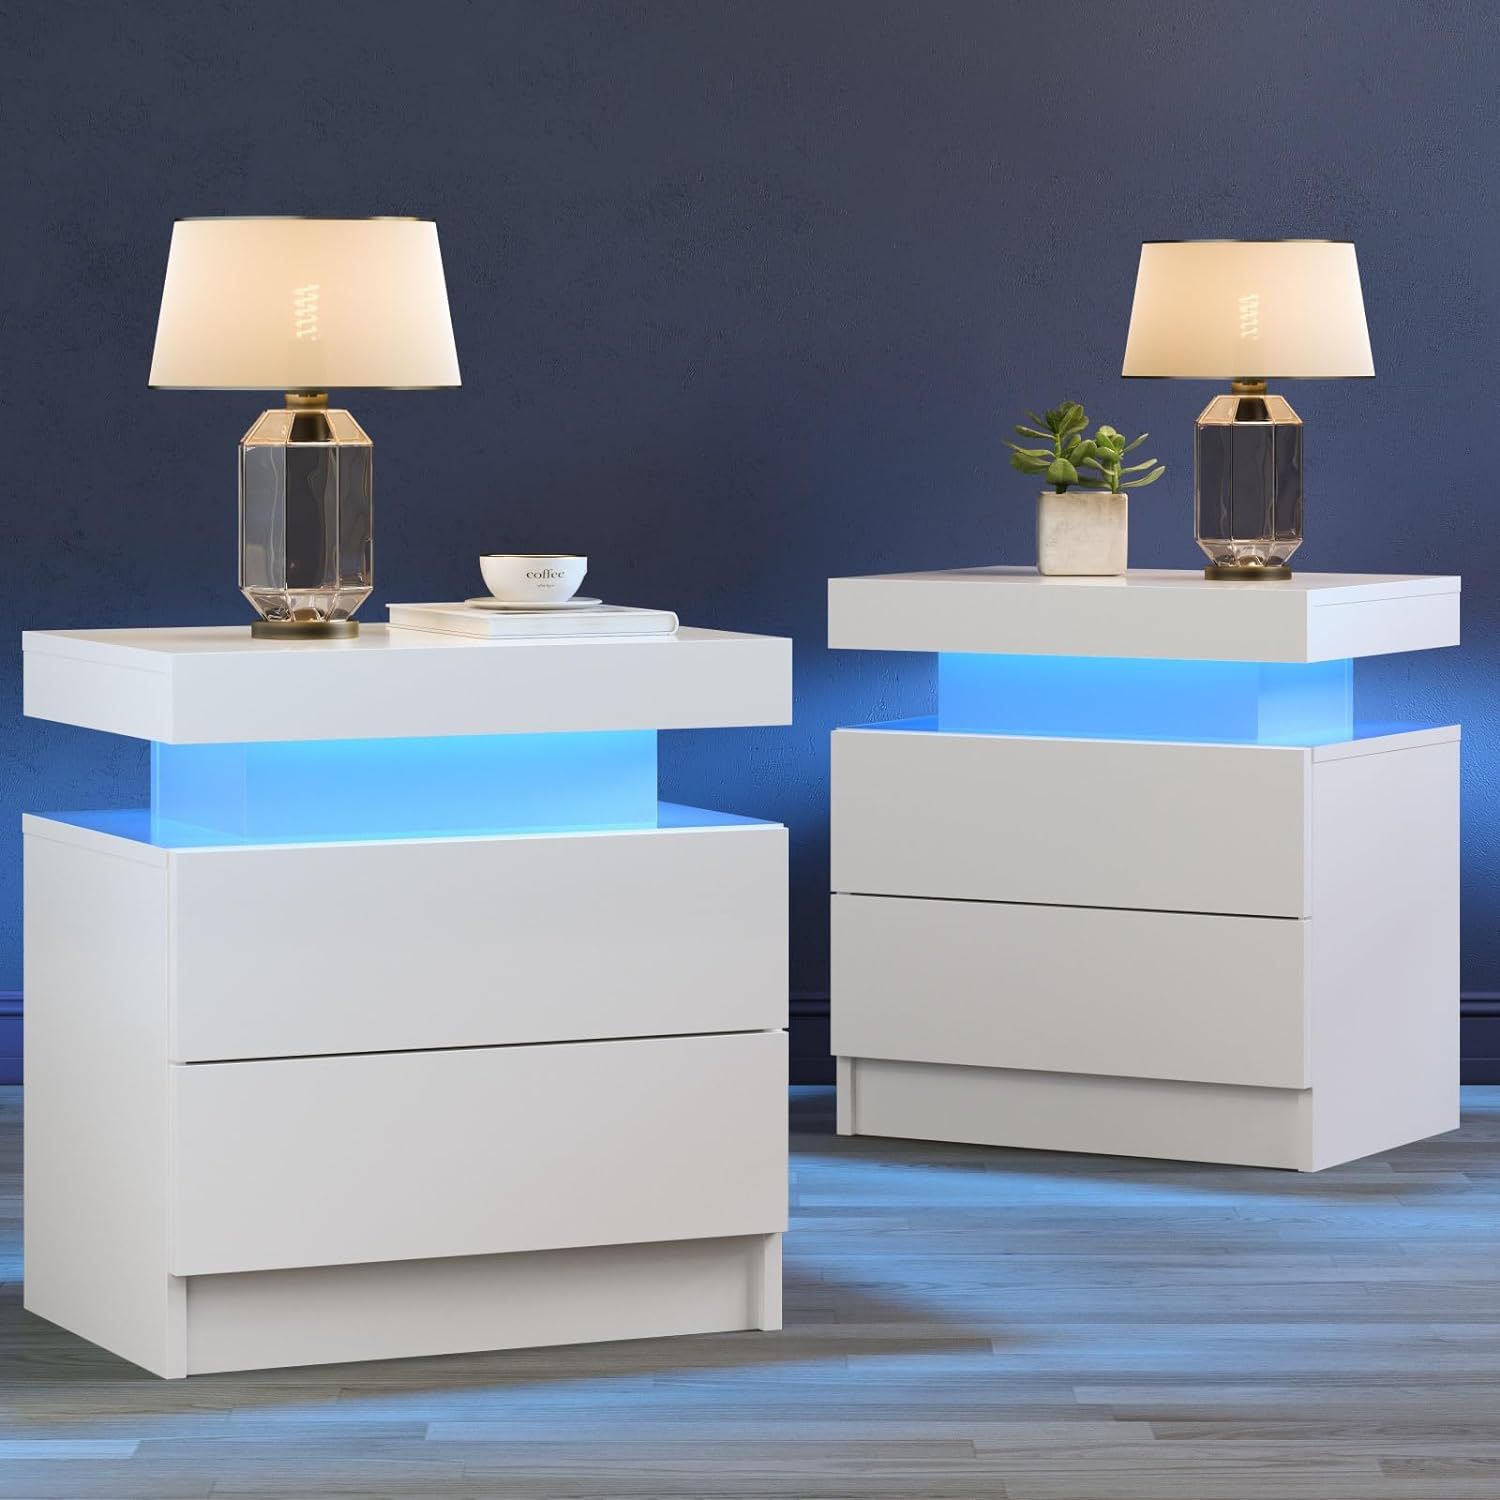 Nightstand Set of 2 LED Nightstand with 2 Drawers, Bedside Table with Drawers for Bedroom Furniture, Side Bed Table with LED Light, White